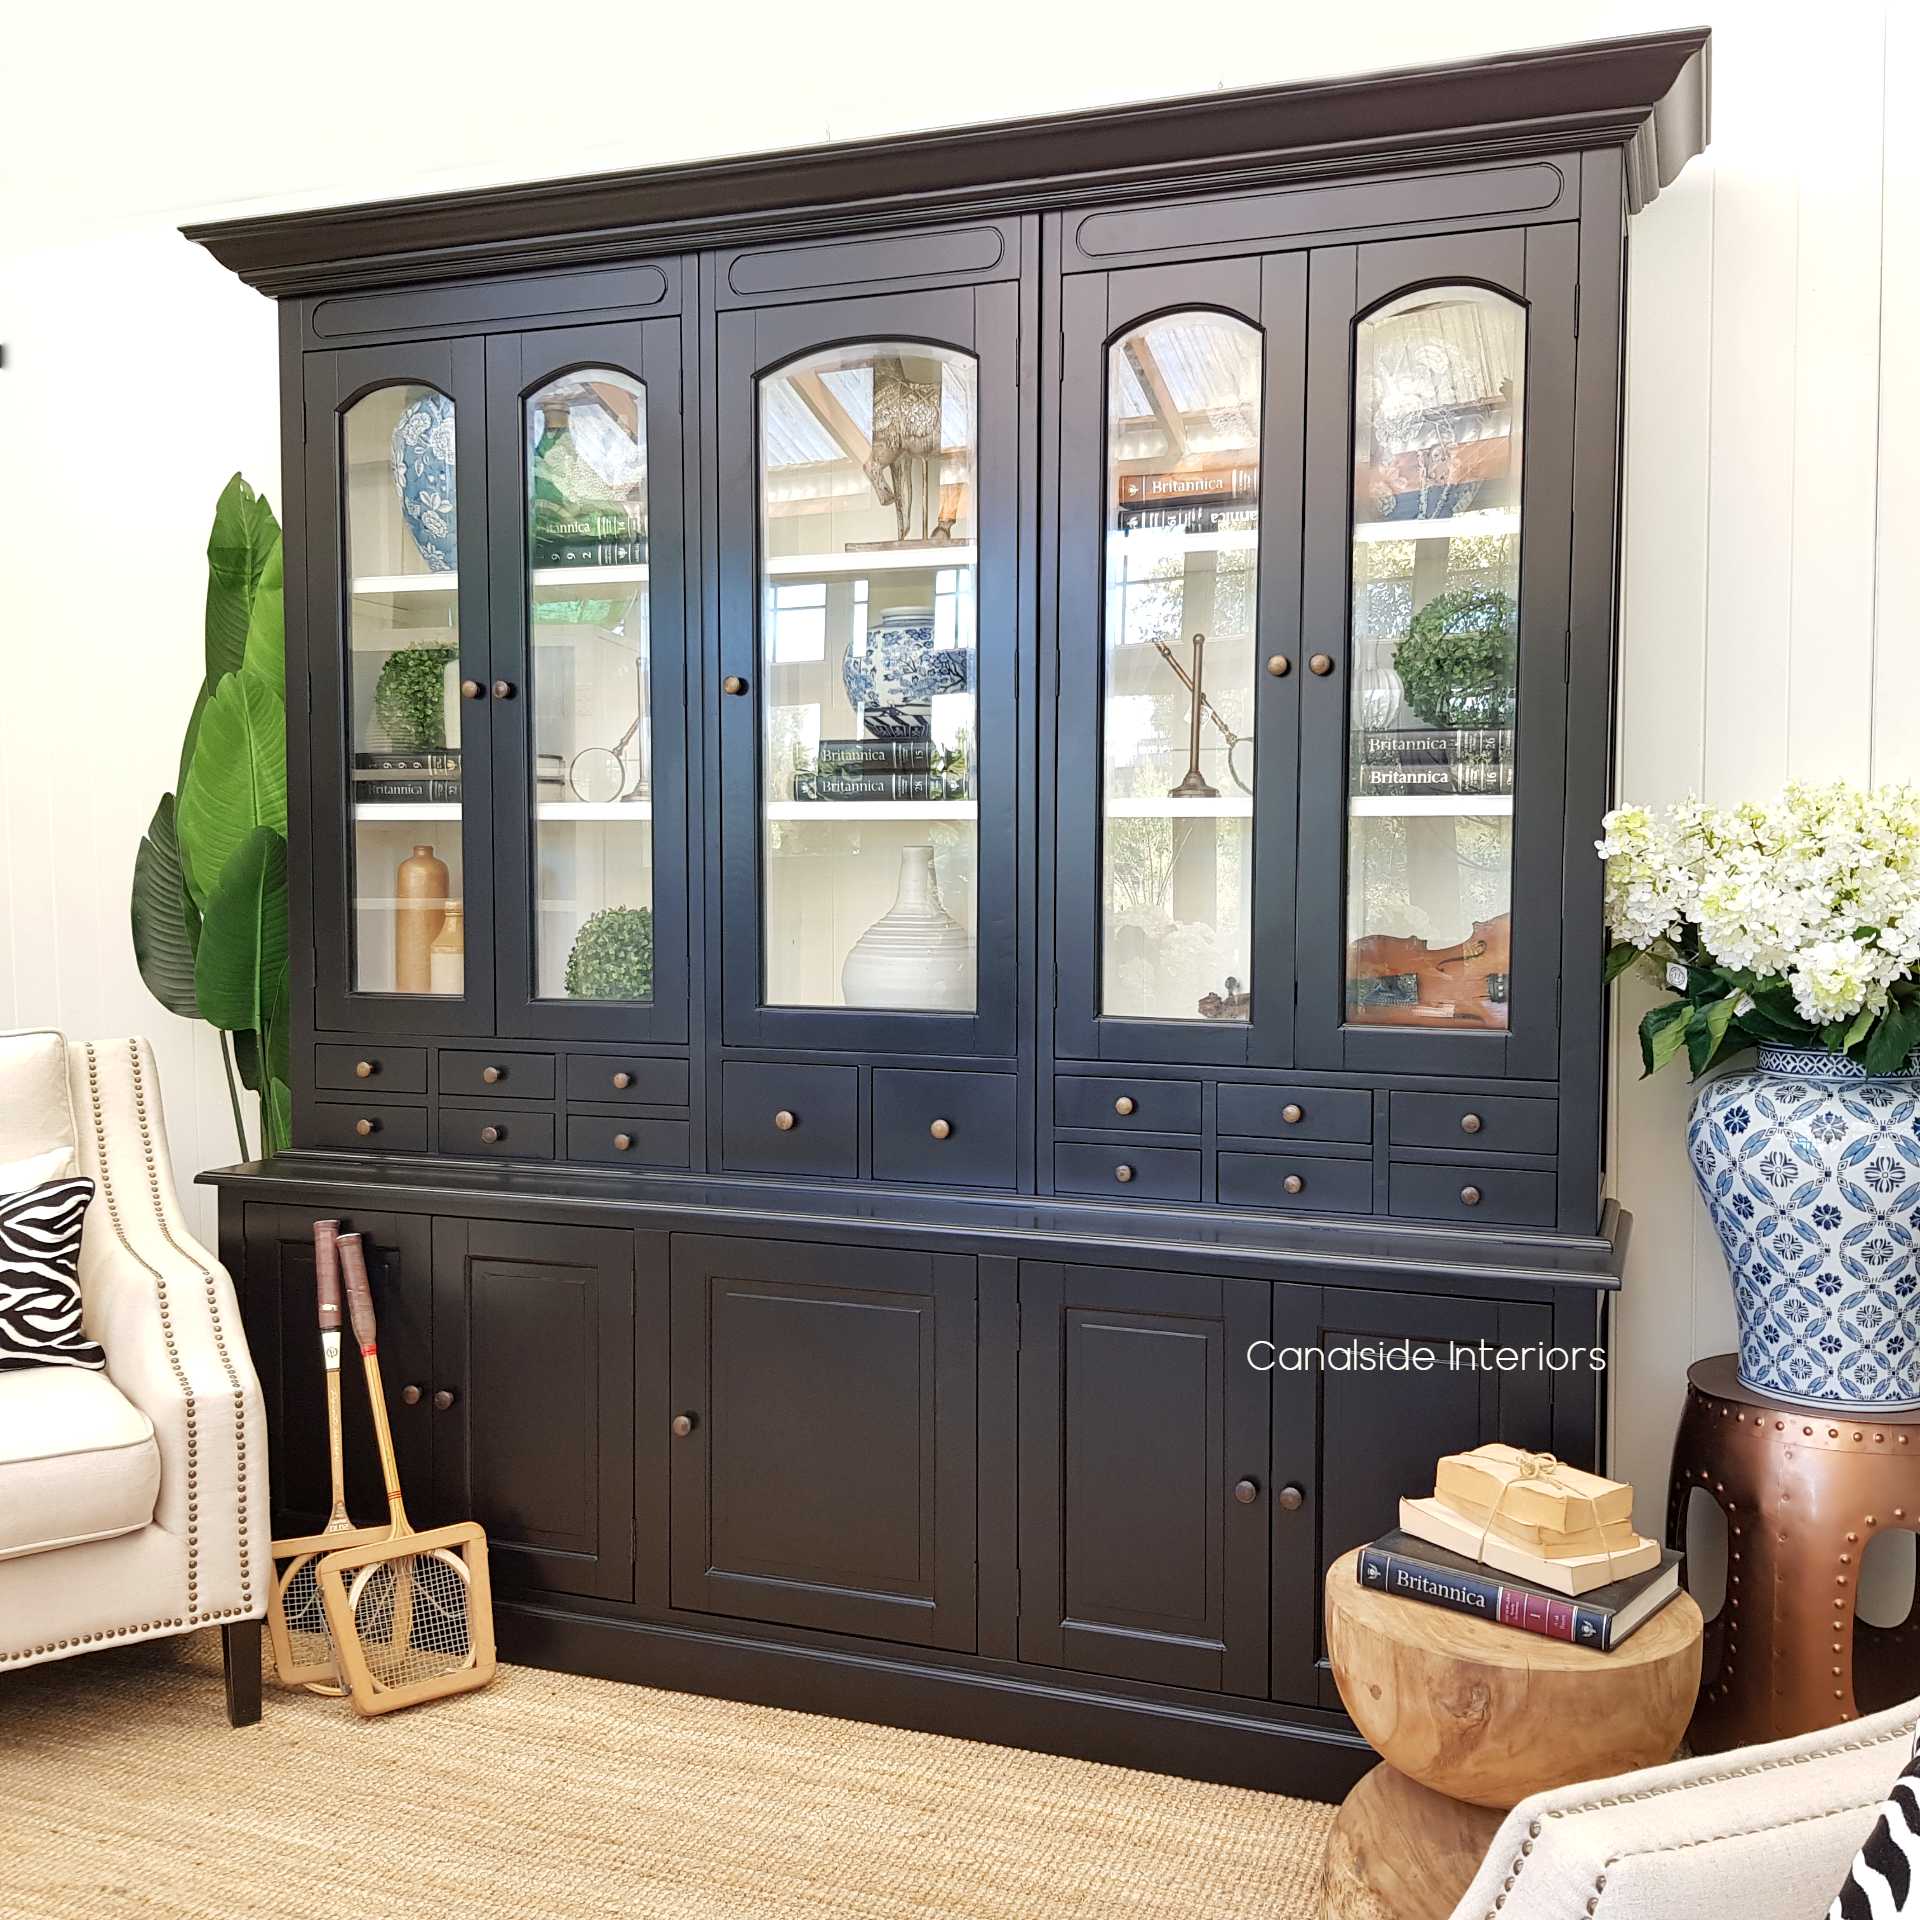 Key Largo 5 Door Display Unit Distressed Black with off white interior  HAMPTONS Style, PLANTATION Style, LIVING Cupboards & Bookcases, STORAGE, STORAGE Bookshelves & Cupboards